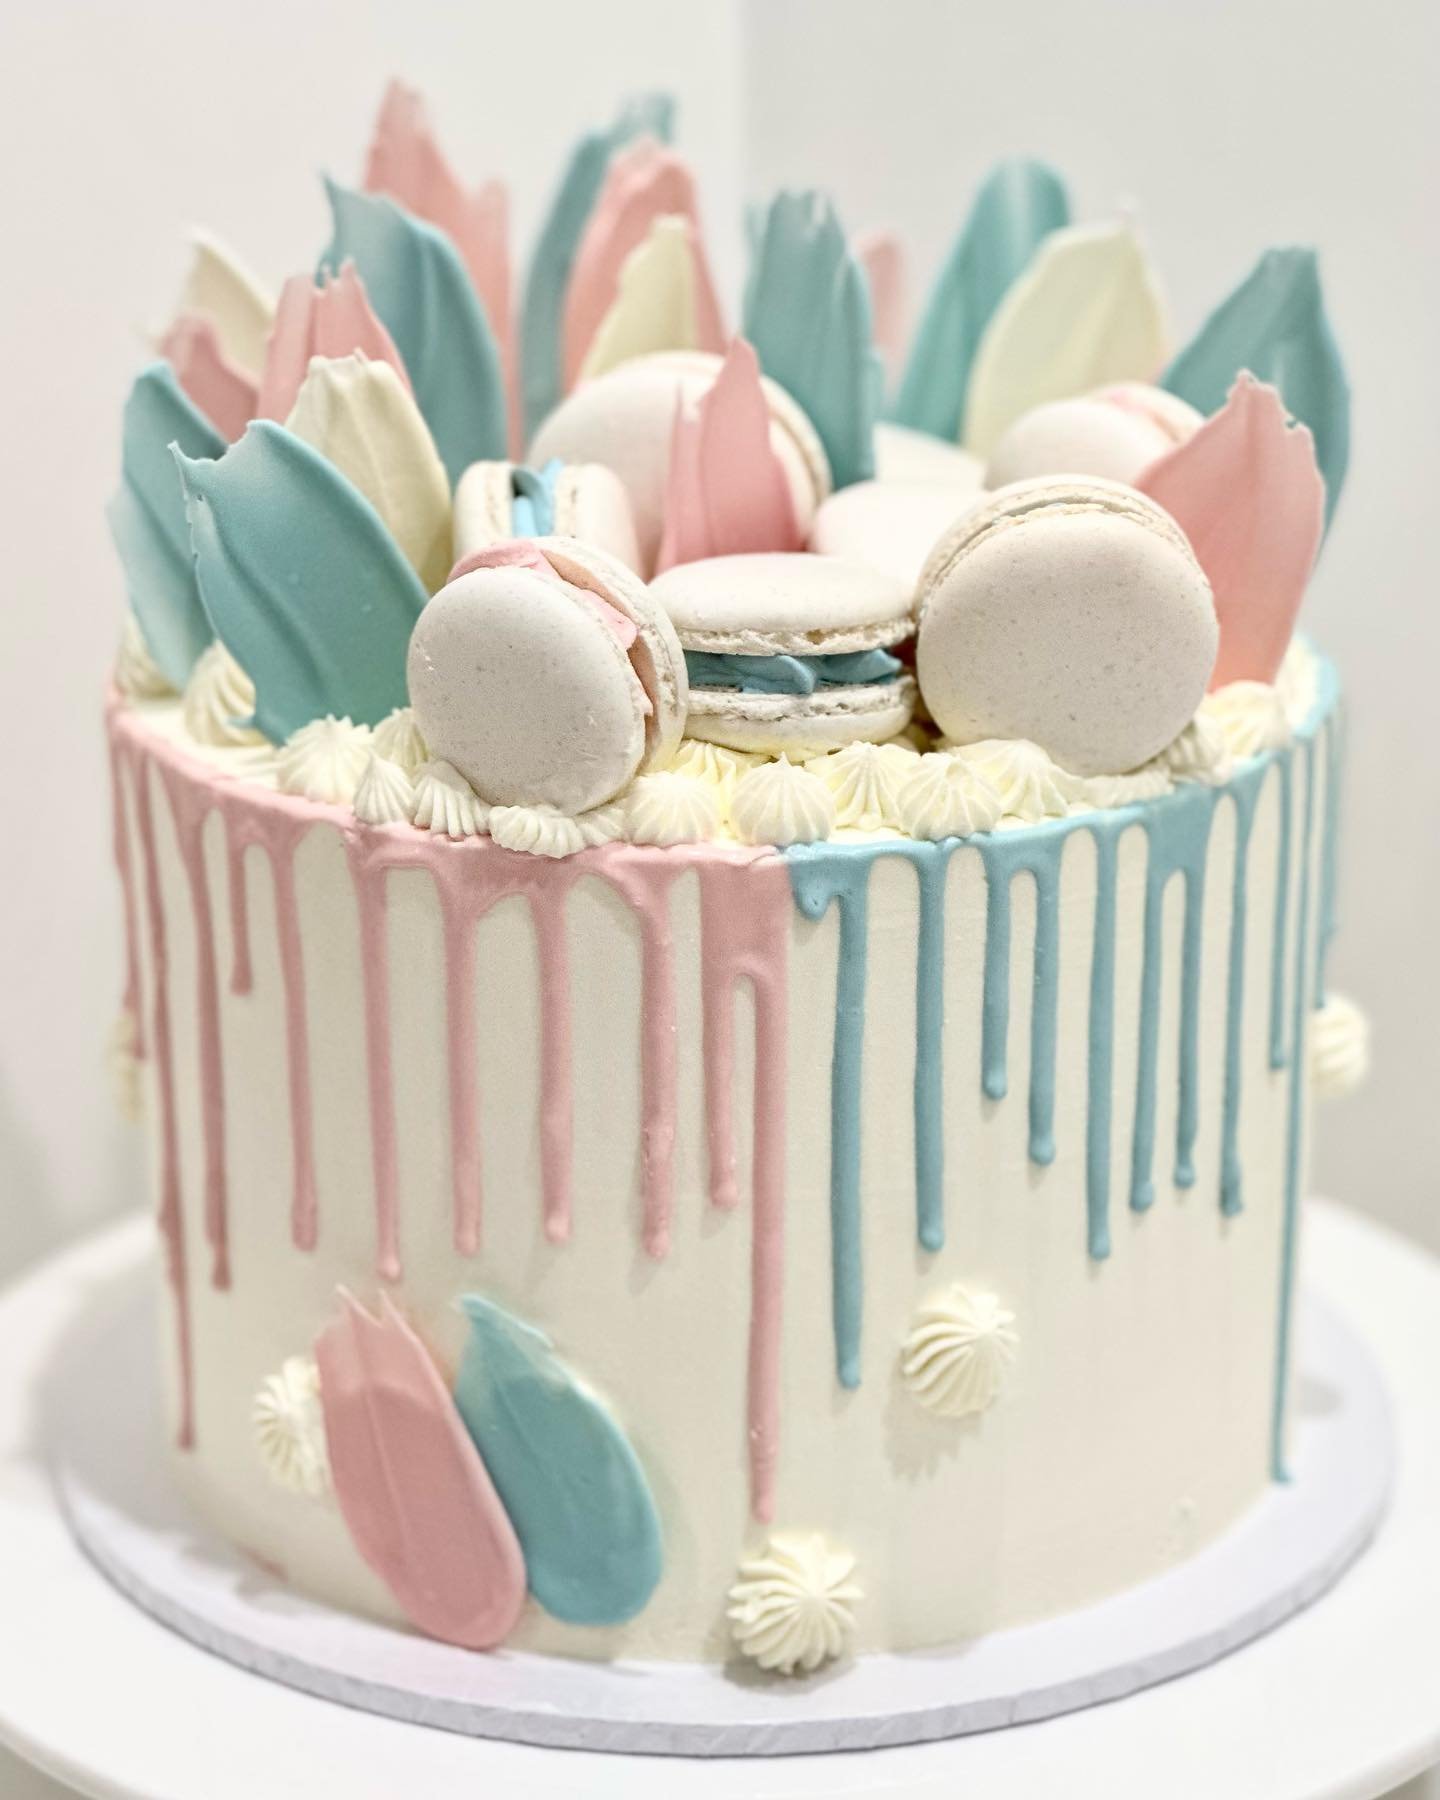 To know the gender of a baby before the &ldquo;parents to be&rdquo;  do is a level of trust that I feel very privileged to given. My client&rsquo;s obstetrician email me these details so I could create this gender reveal cake for them. Unfortunately 